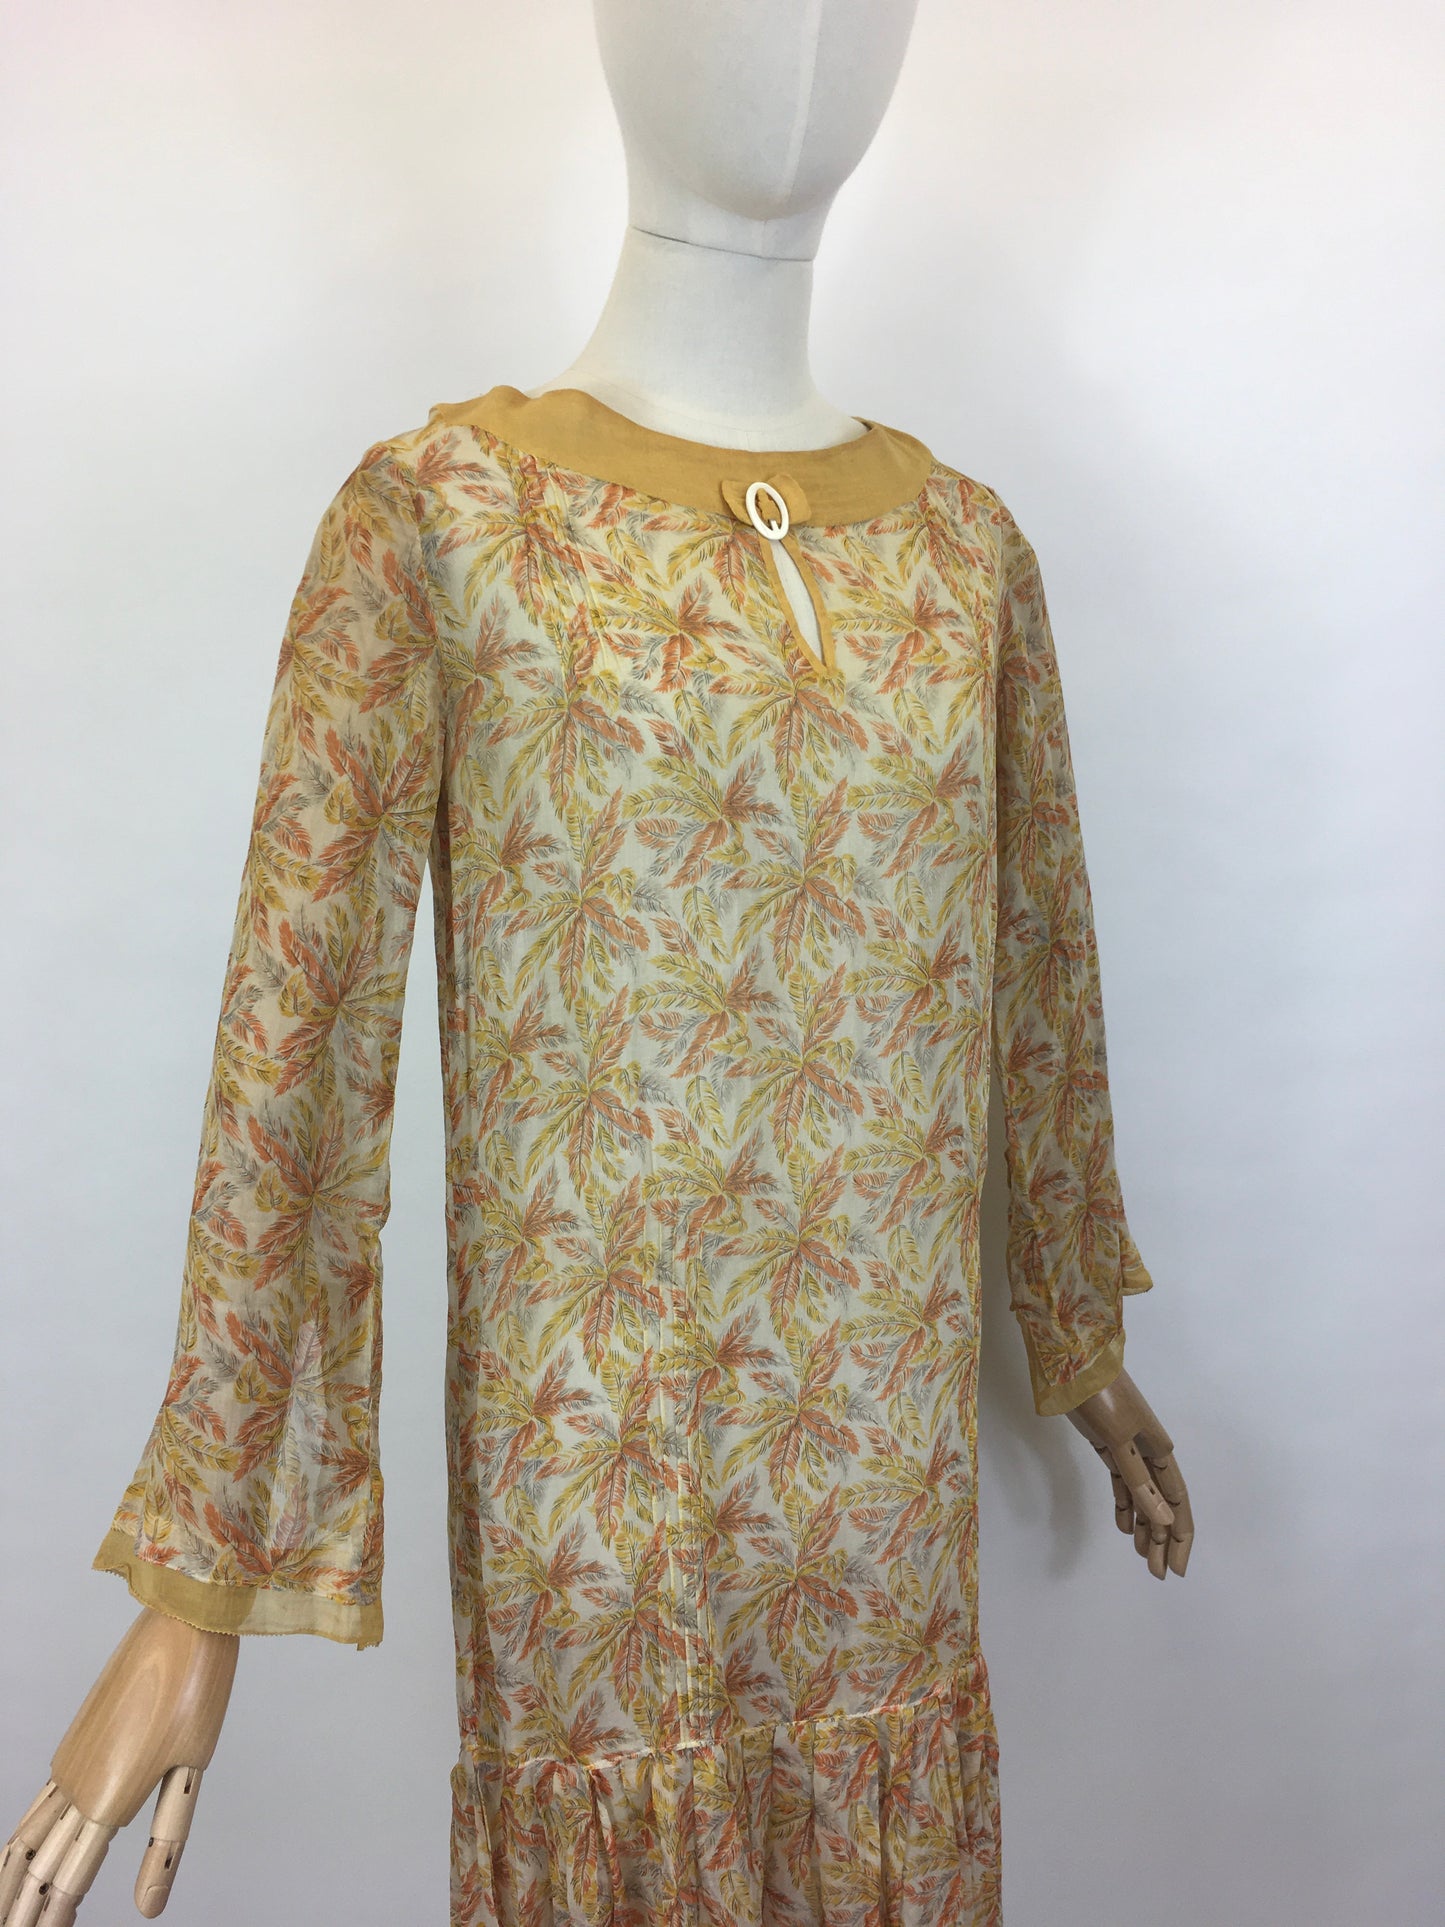 Original 1920’s FABULOUS Cotton Lawn Dress - Flora and Fauna in Buttery Yellows,Soft Oranges and Powdered Greys